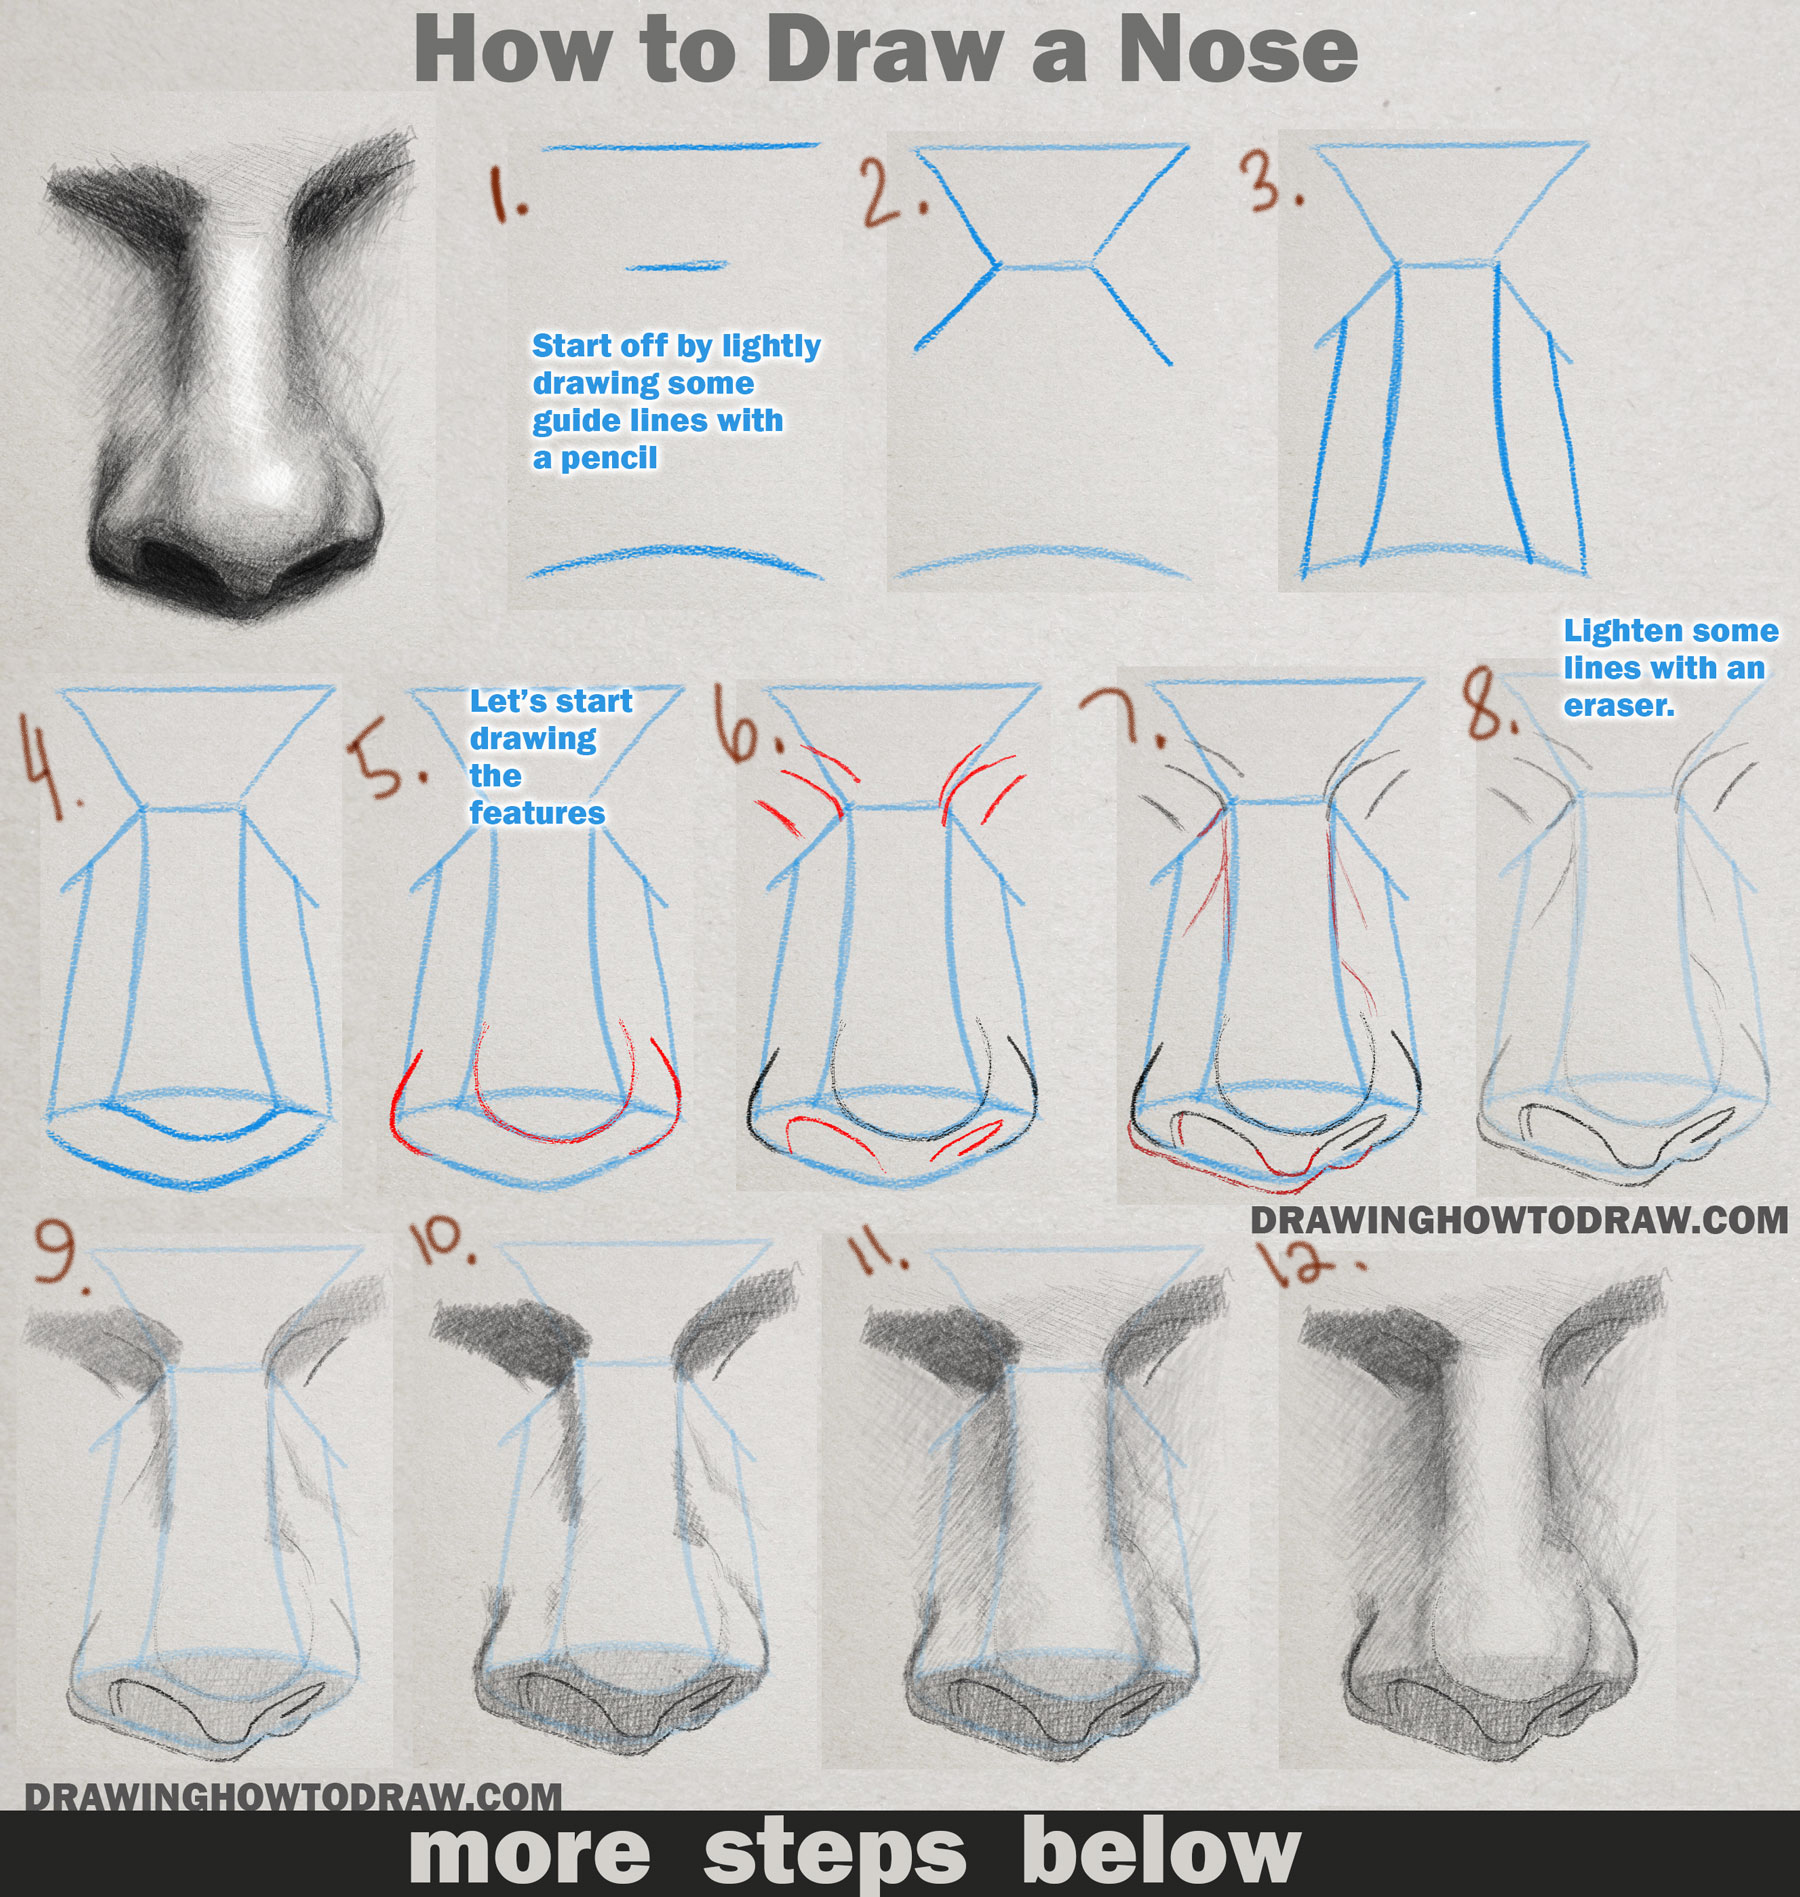 How To Draw A Realistic Nose Step By Step For Beginners / How To Draw A